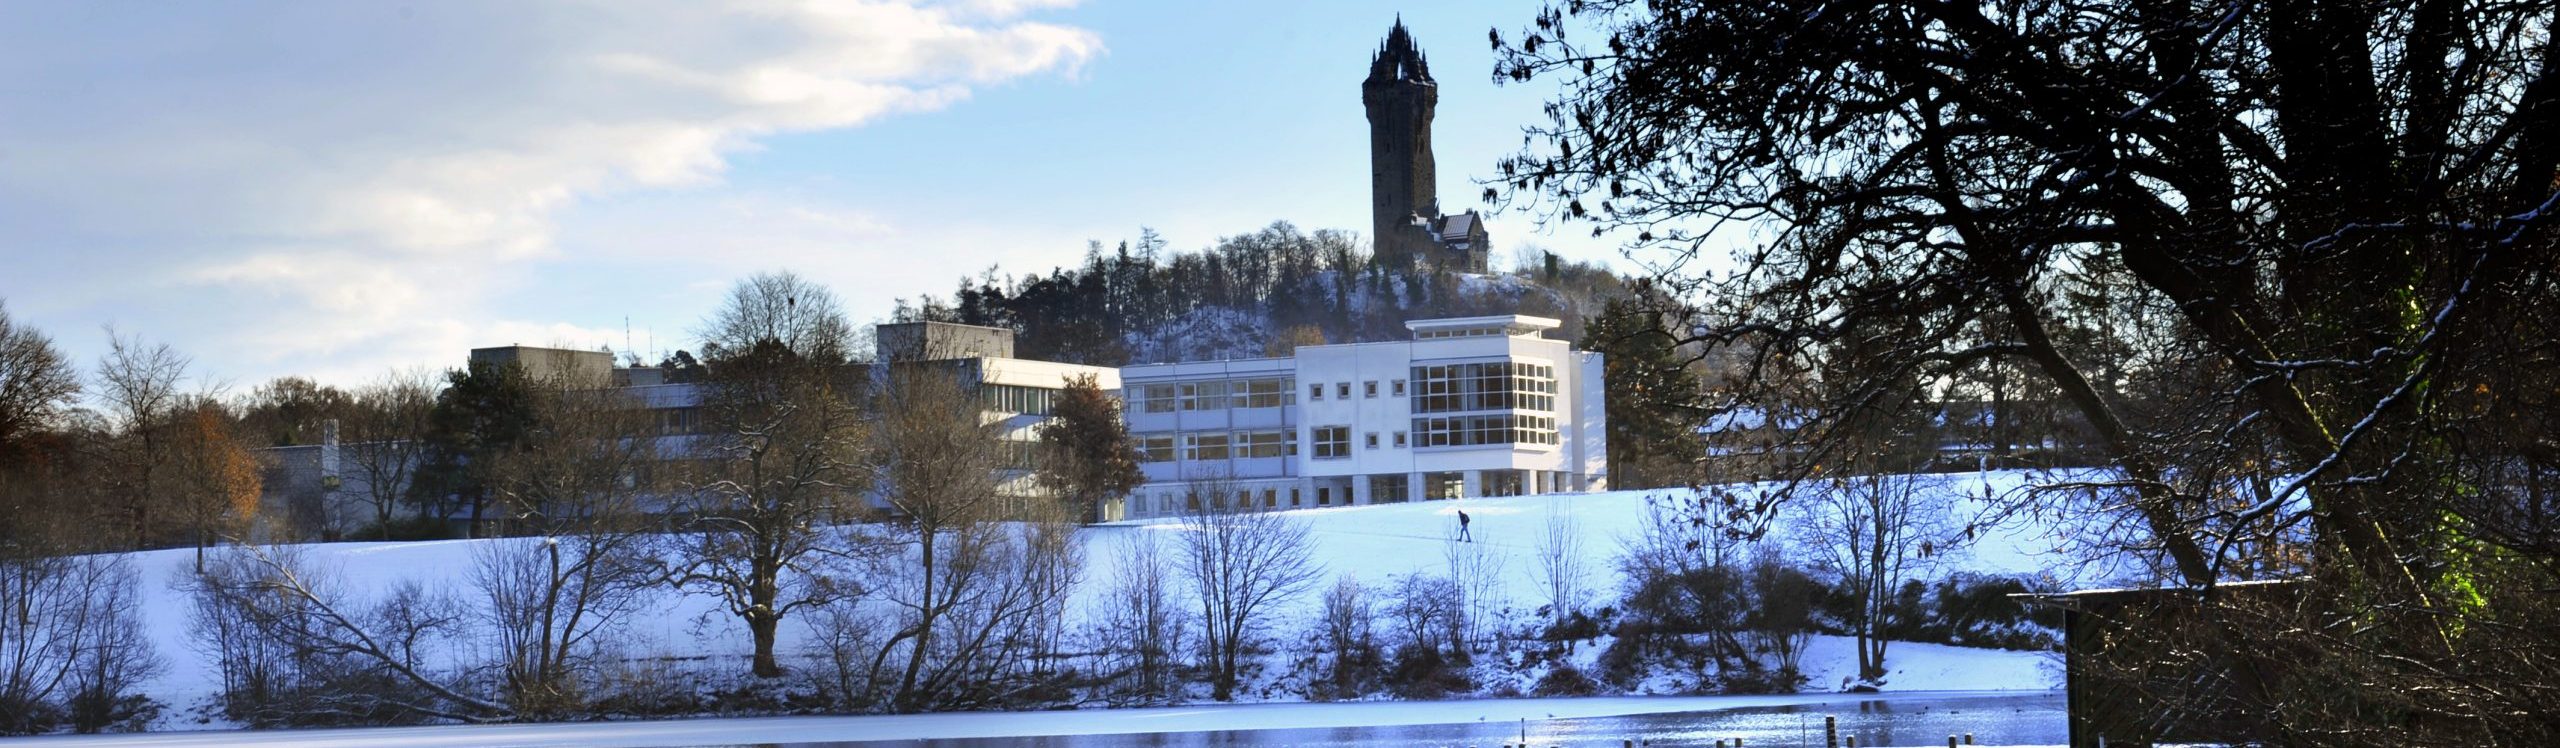 Winter campus image - Wallace Monument, Loch, Cottrell Building, Snow, Ice